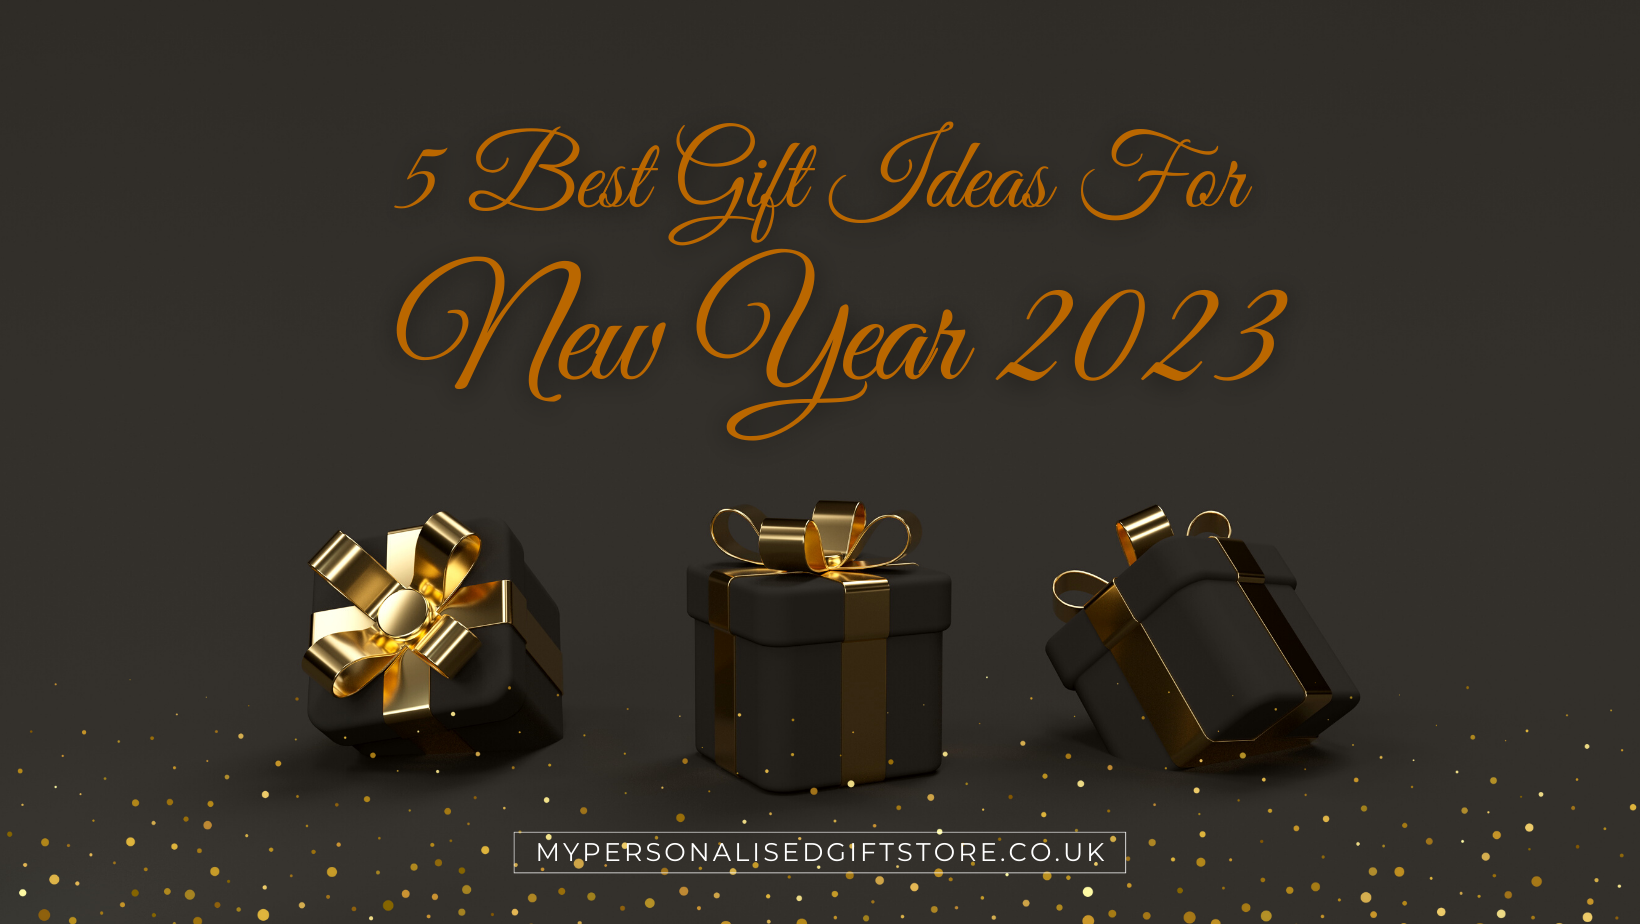 5 Best Gift Ideas For New Year 2023